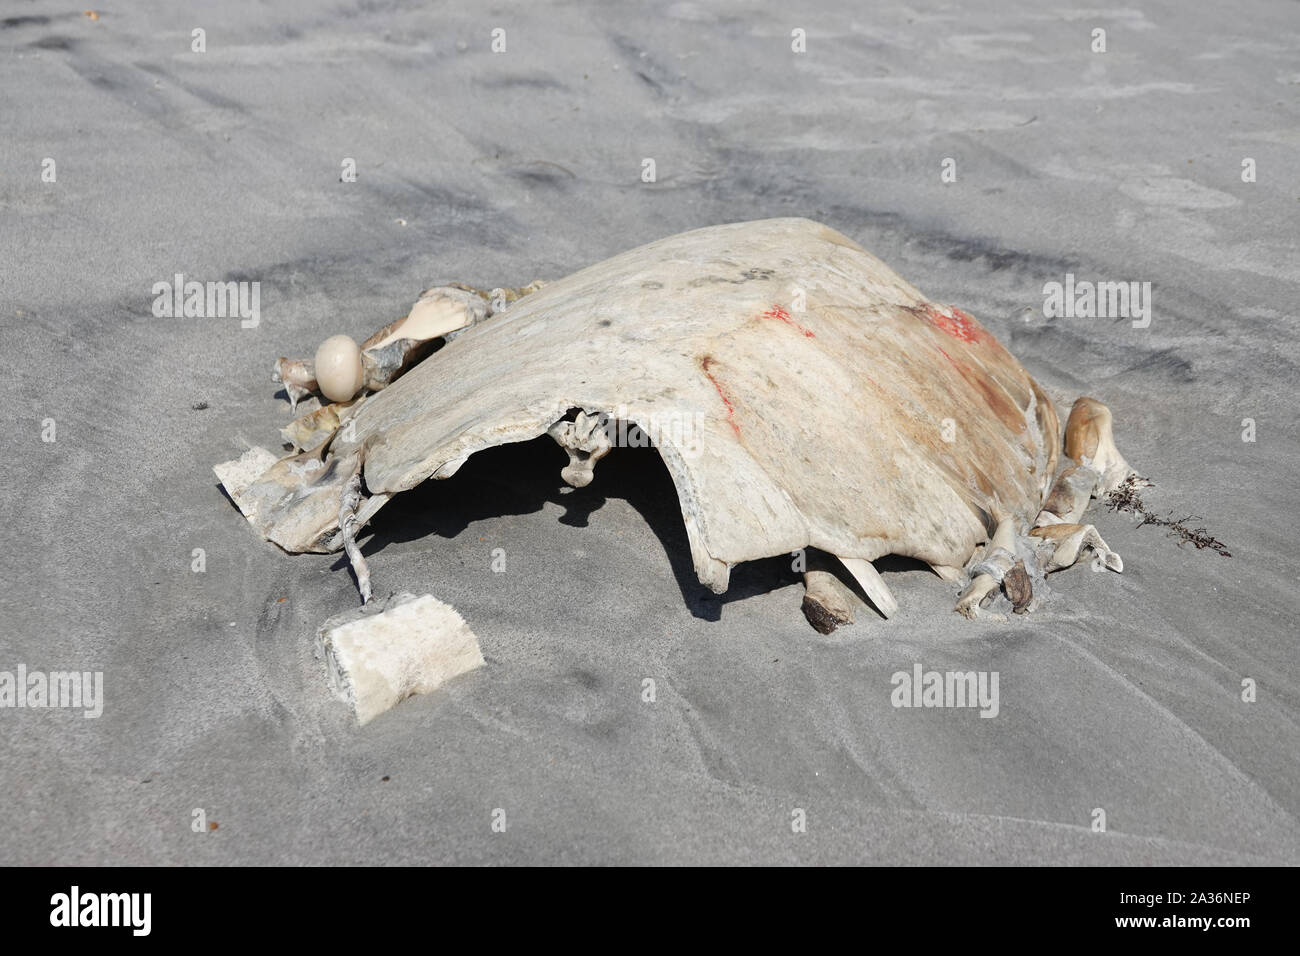 Turtle carapace on a beach Stock Photo